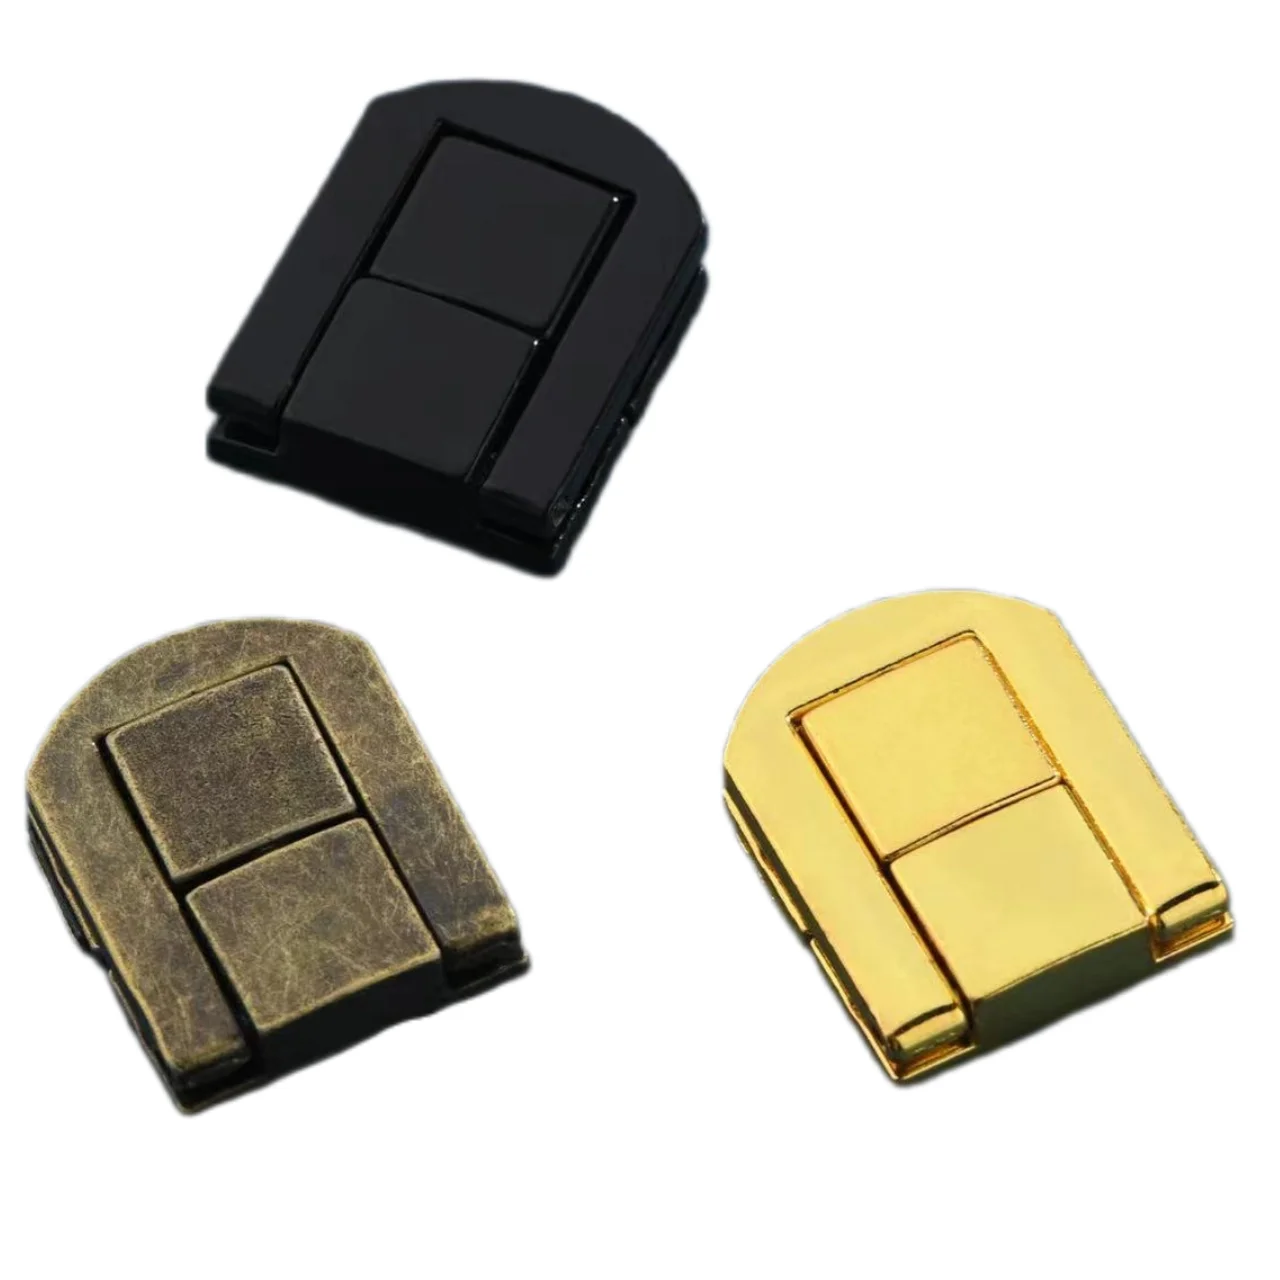 

Antique Box Buckle Clasp Buckle Alloy Square Vintage Wooden Wine Box Furniture Locked Buckles,32*43mm,Silver,Gold Color,8Sets